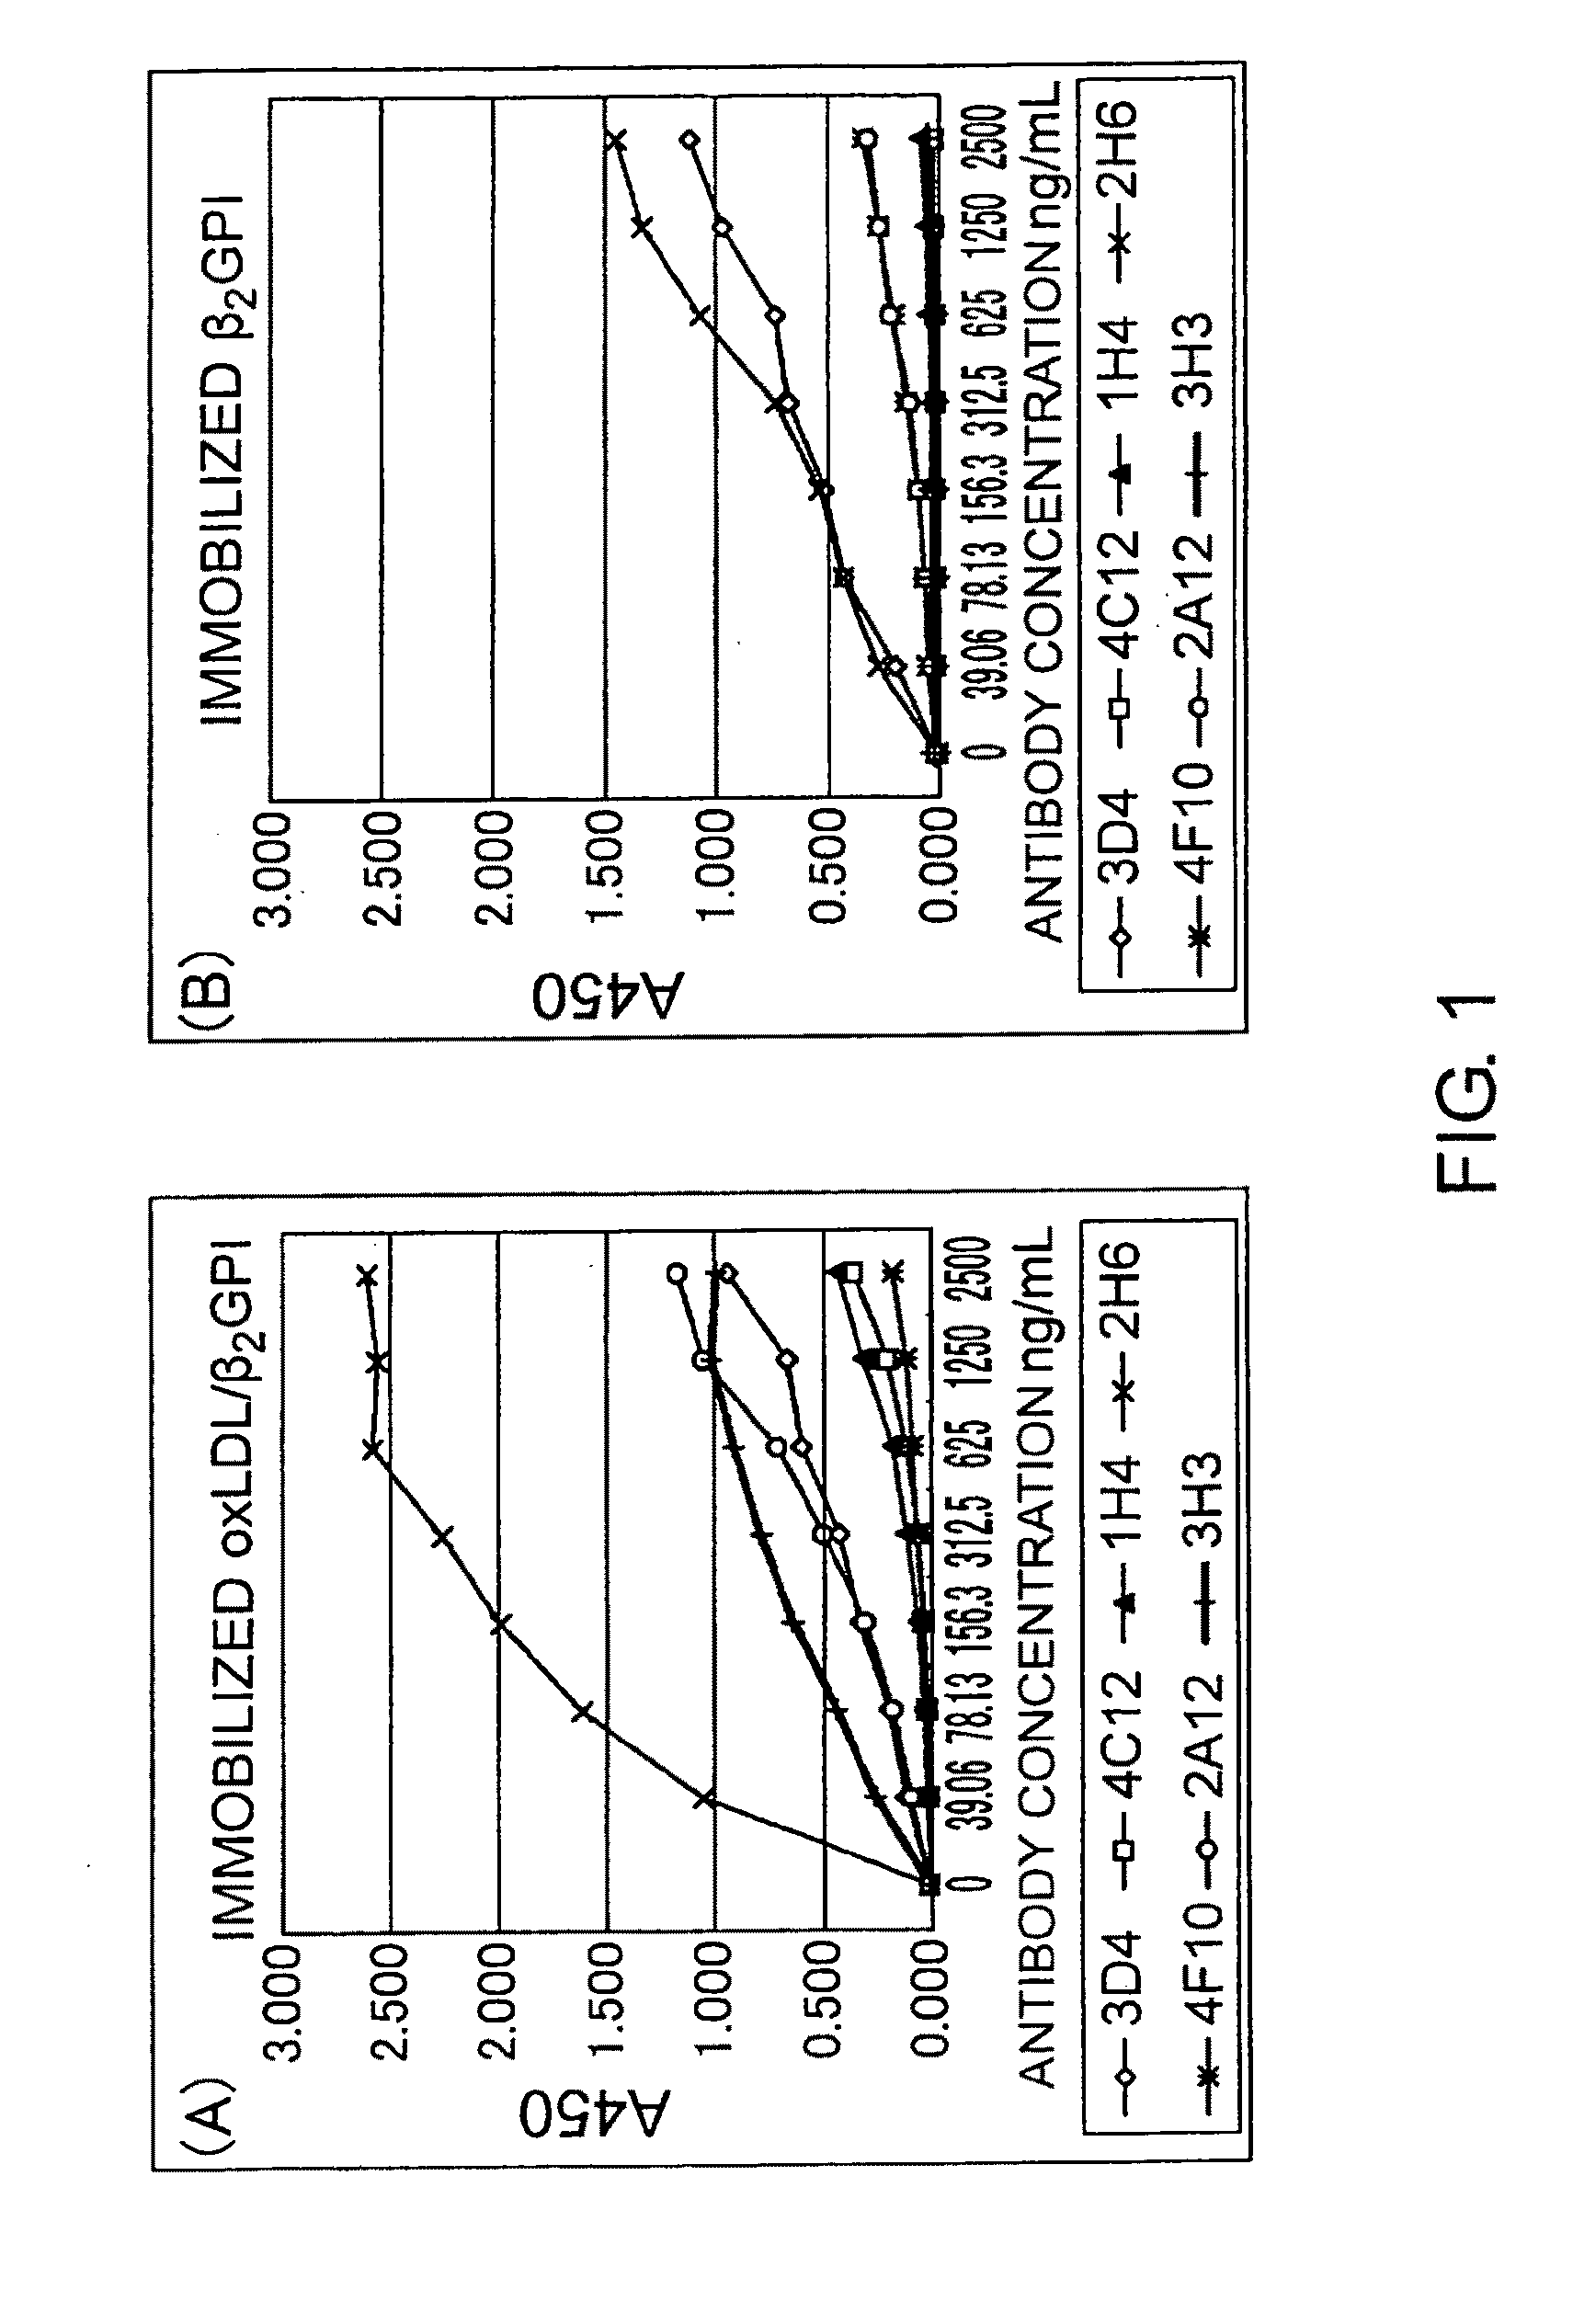 Antibody against oxidized ldl/ß2gpi complex and use of the same